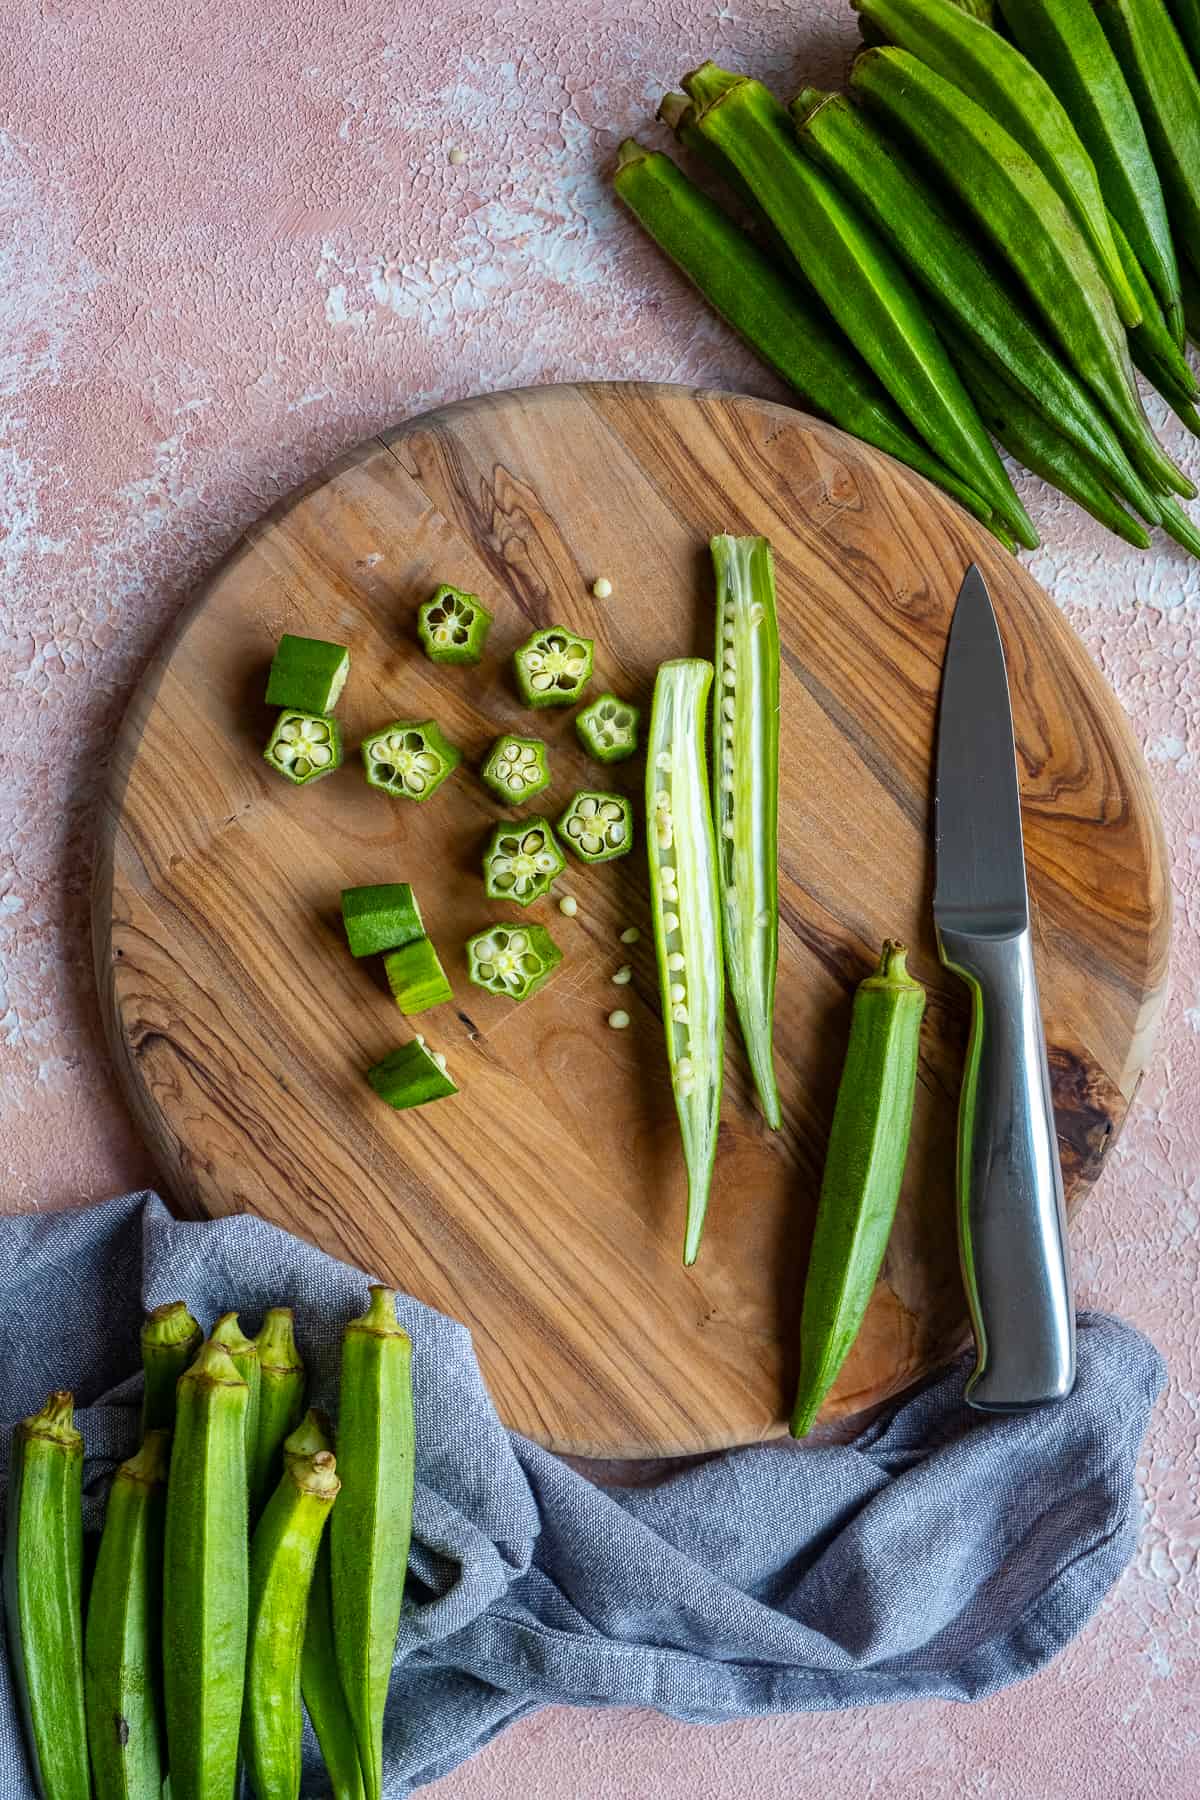 Fresh okra sliced in lengthwise and crosswise on a wooden cutting board and a knife on the side.